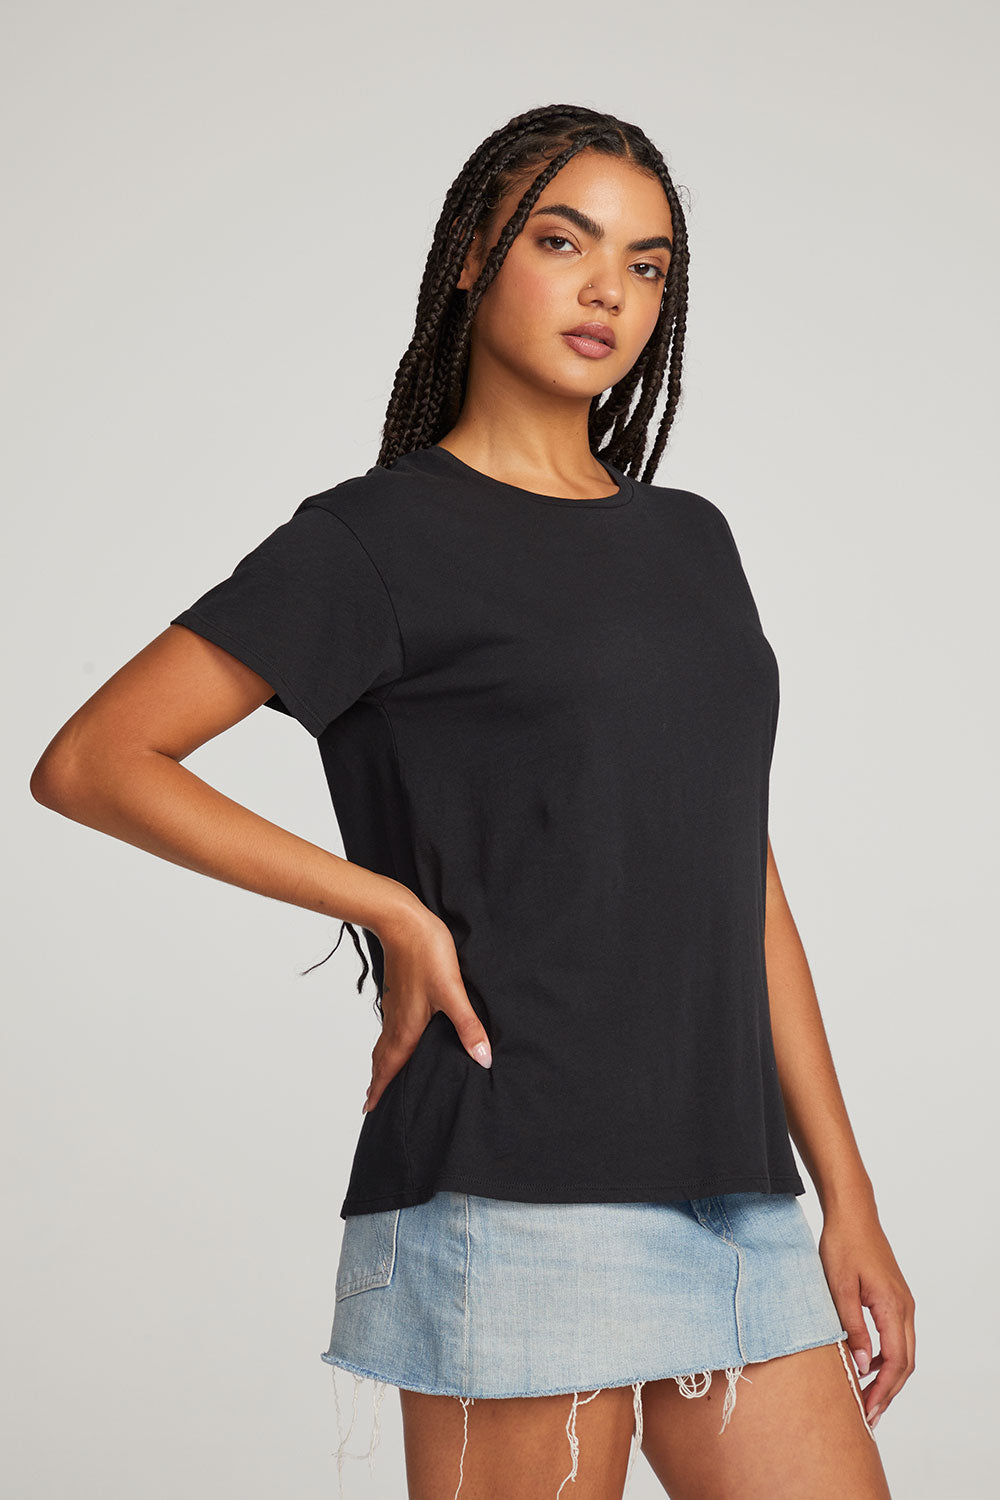 Everyday Essential Black Crew Neck Tee WOMENS chaserbrand